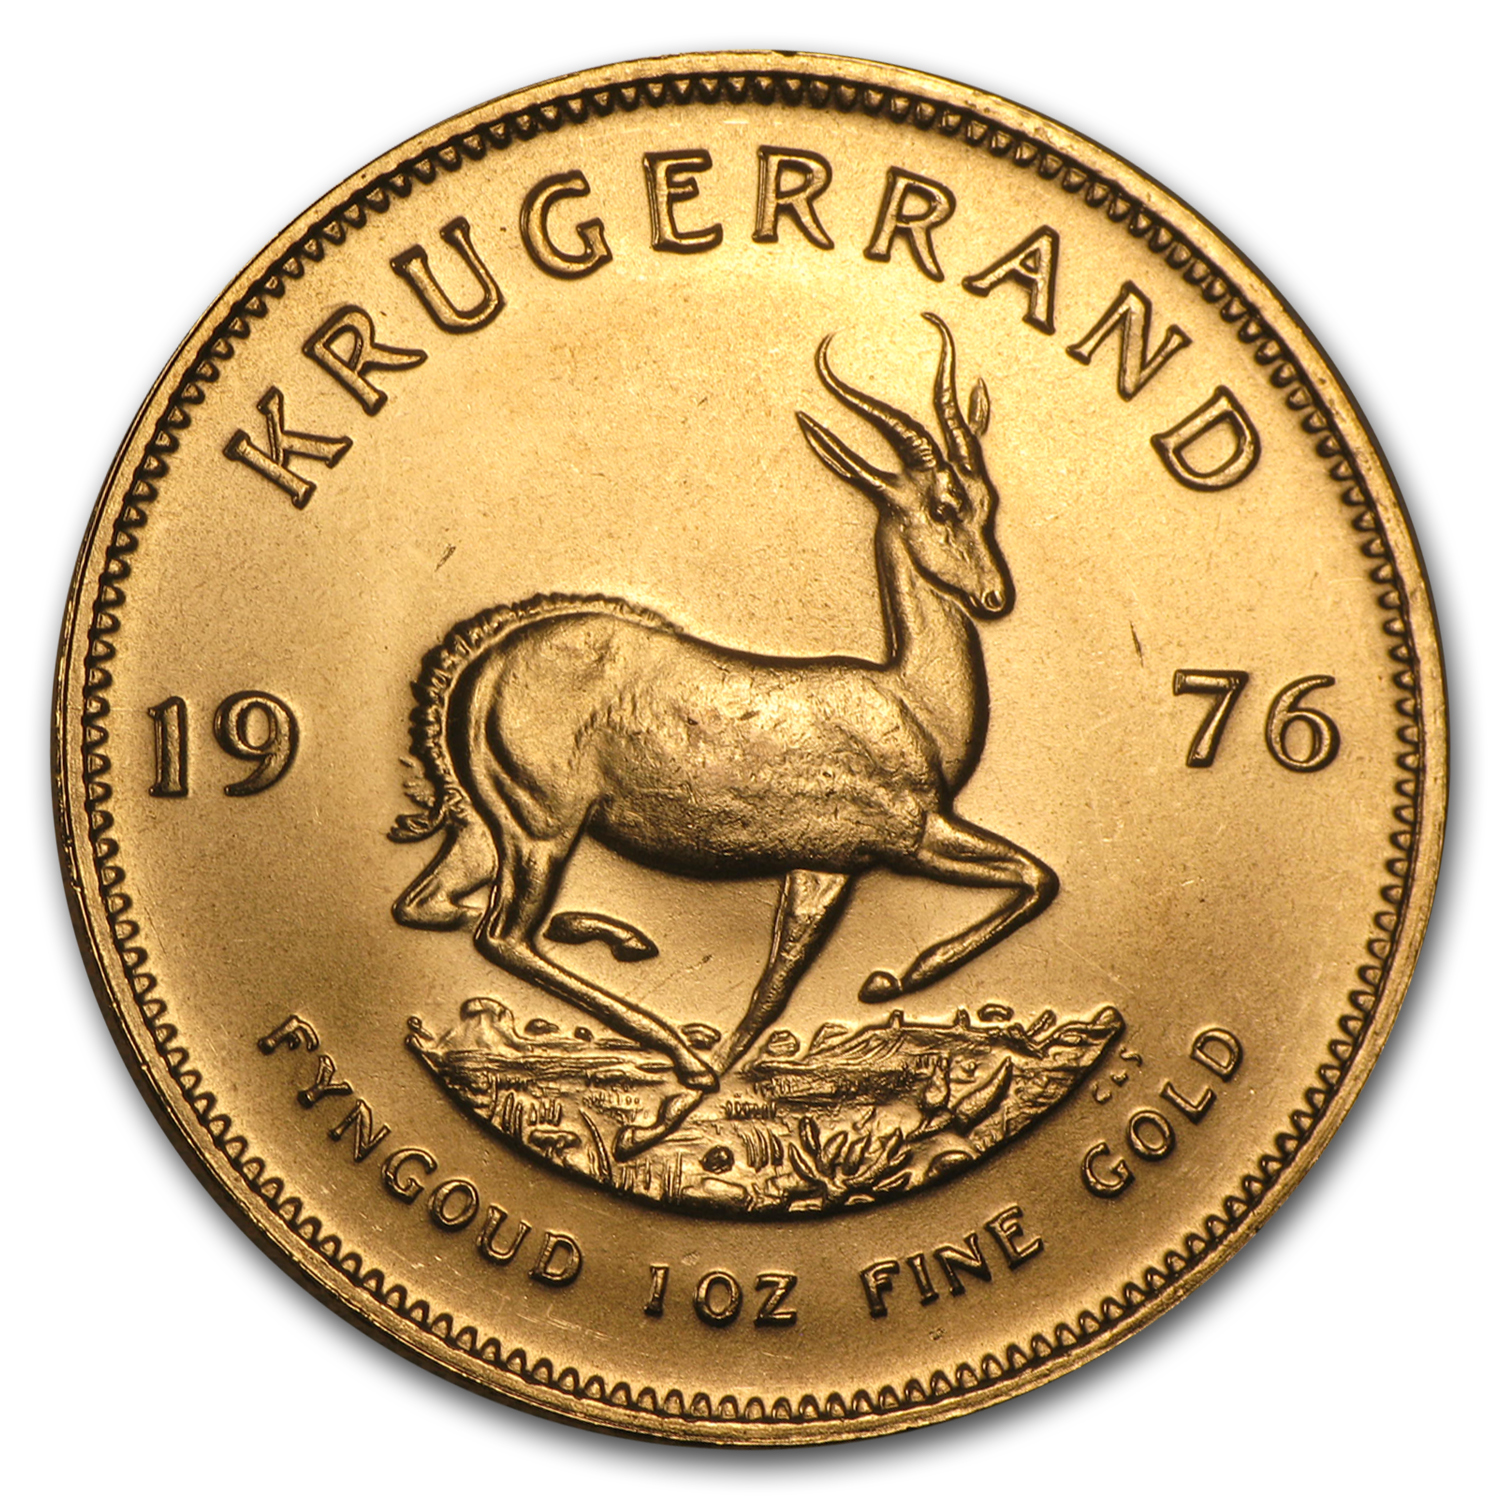 1981 ZA South Africa 1 oz Gold Krugerrand 1 OZ About Uncirculated